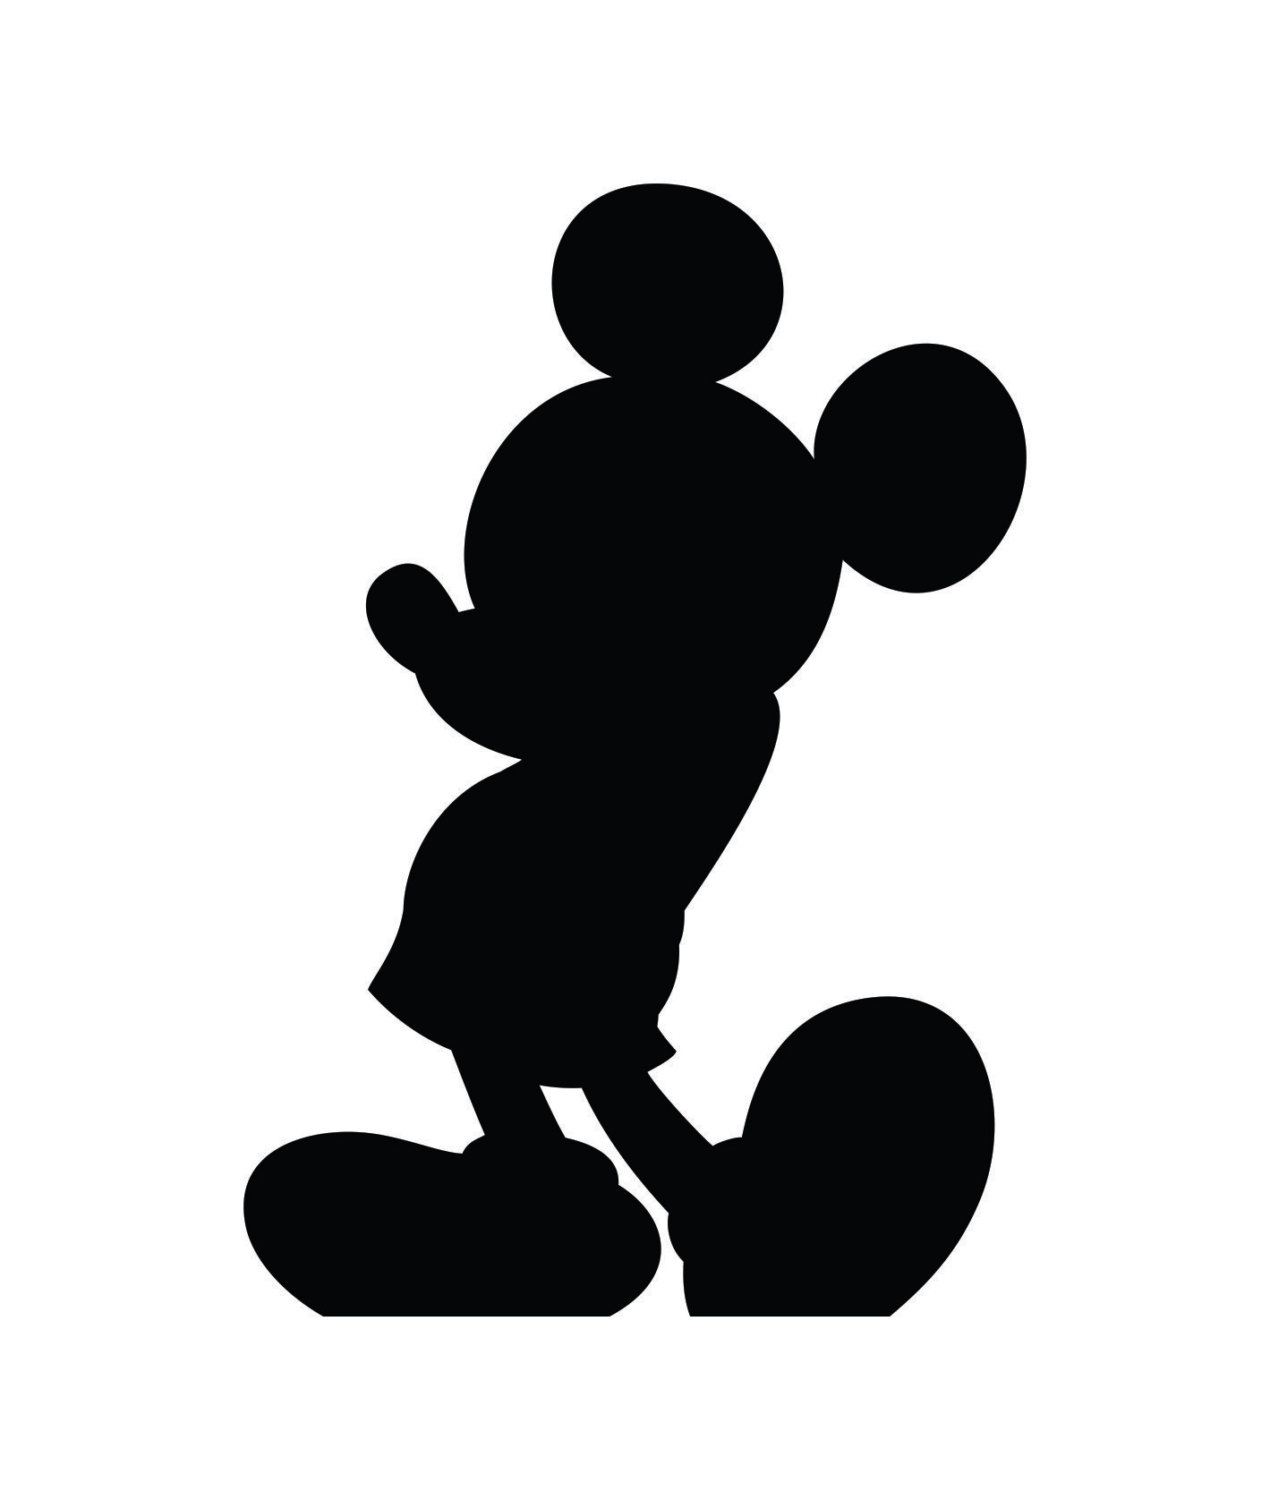 Mickey Mouse Silhouette Clipart   Free Clip Art Images